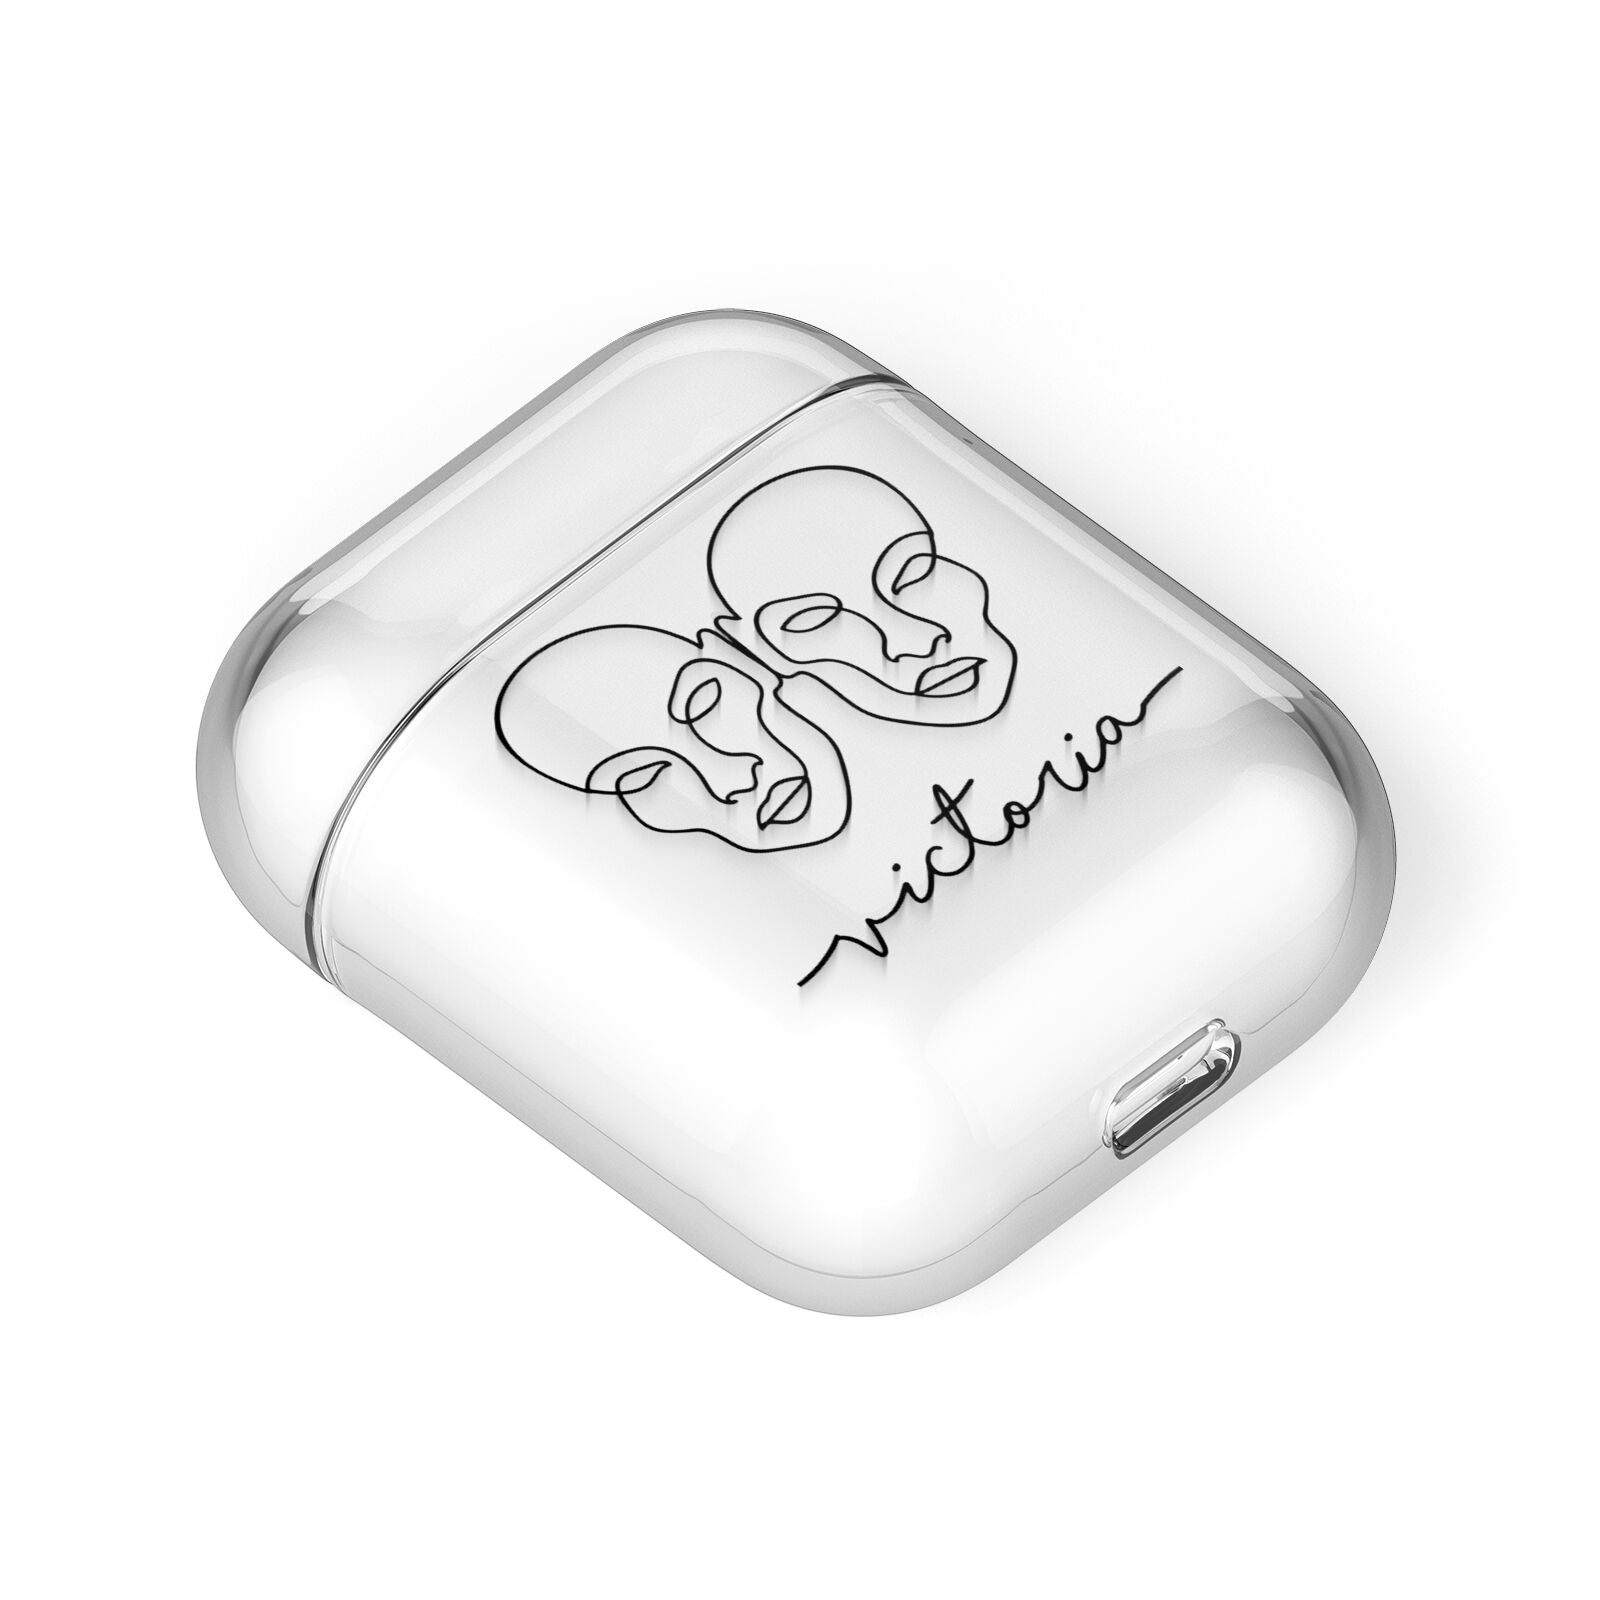 Personalised White Line Art AirPods Case Laid Flat